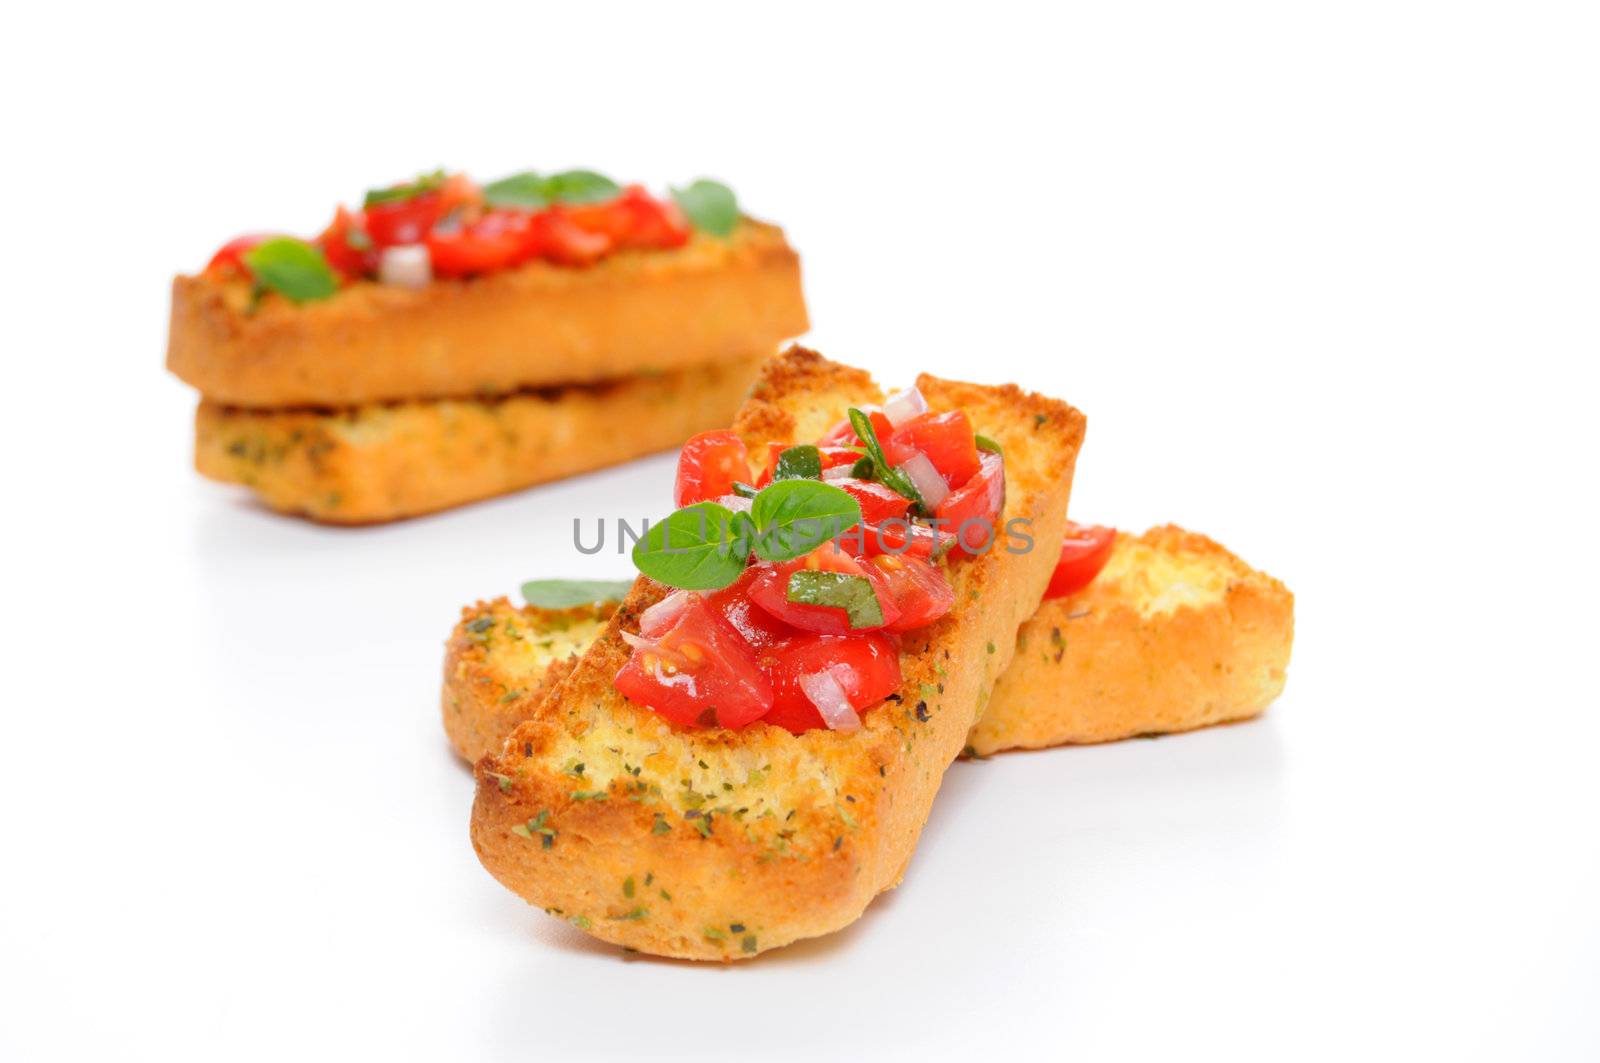 Bruschetta with tomato and fresh herbs on a white background.